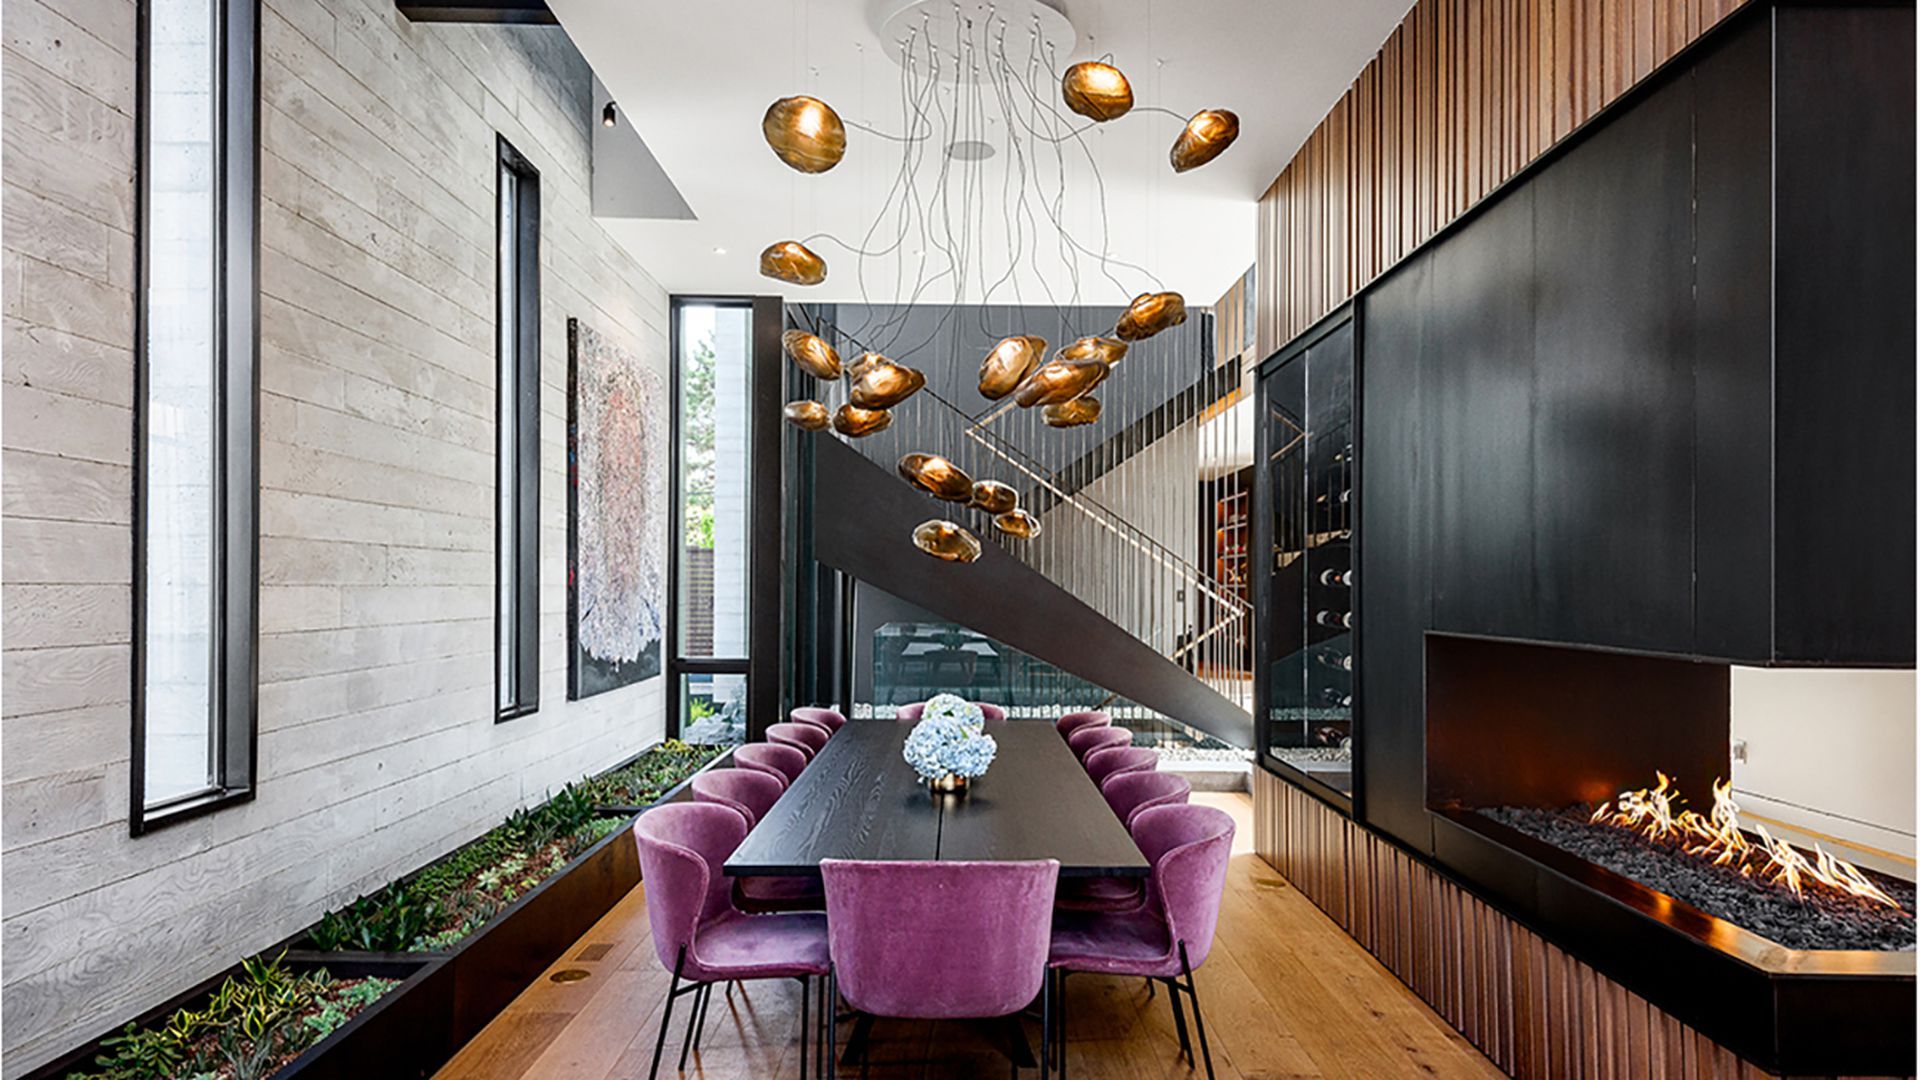 A dining table with purple chairs inside a spacious home.